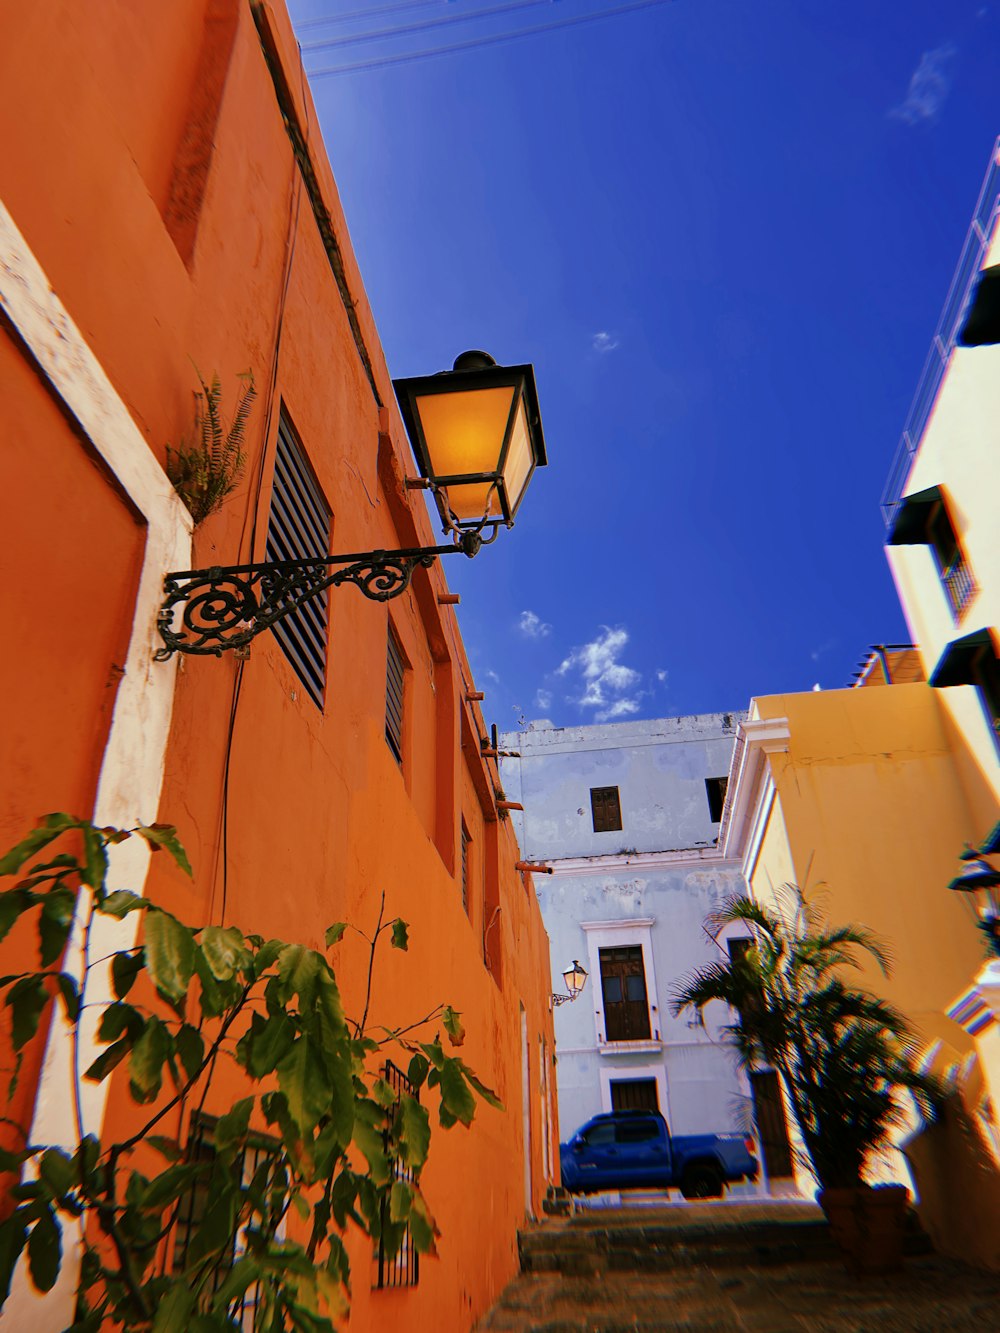 a street with buildings and a lamp post